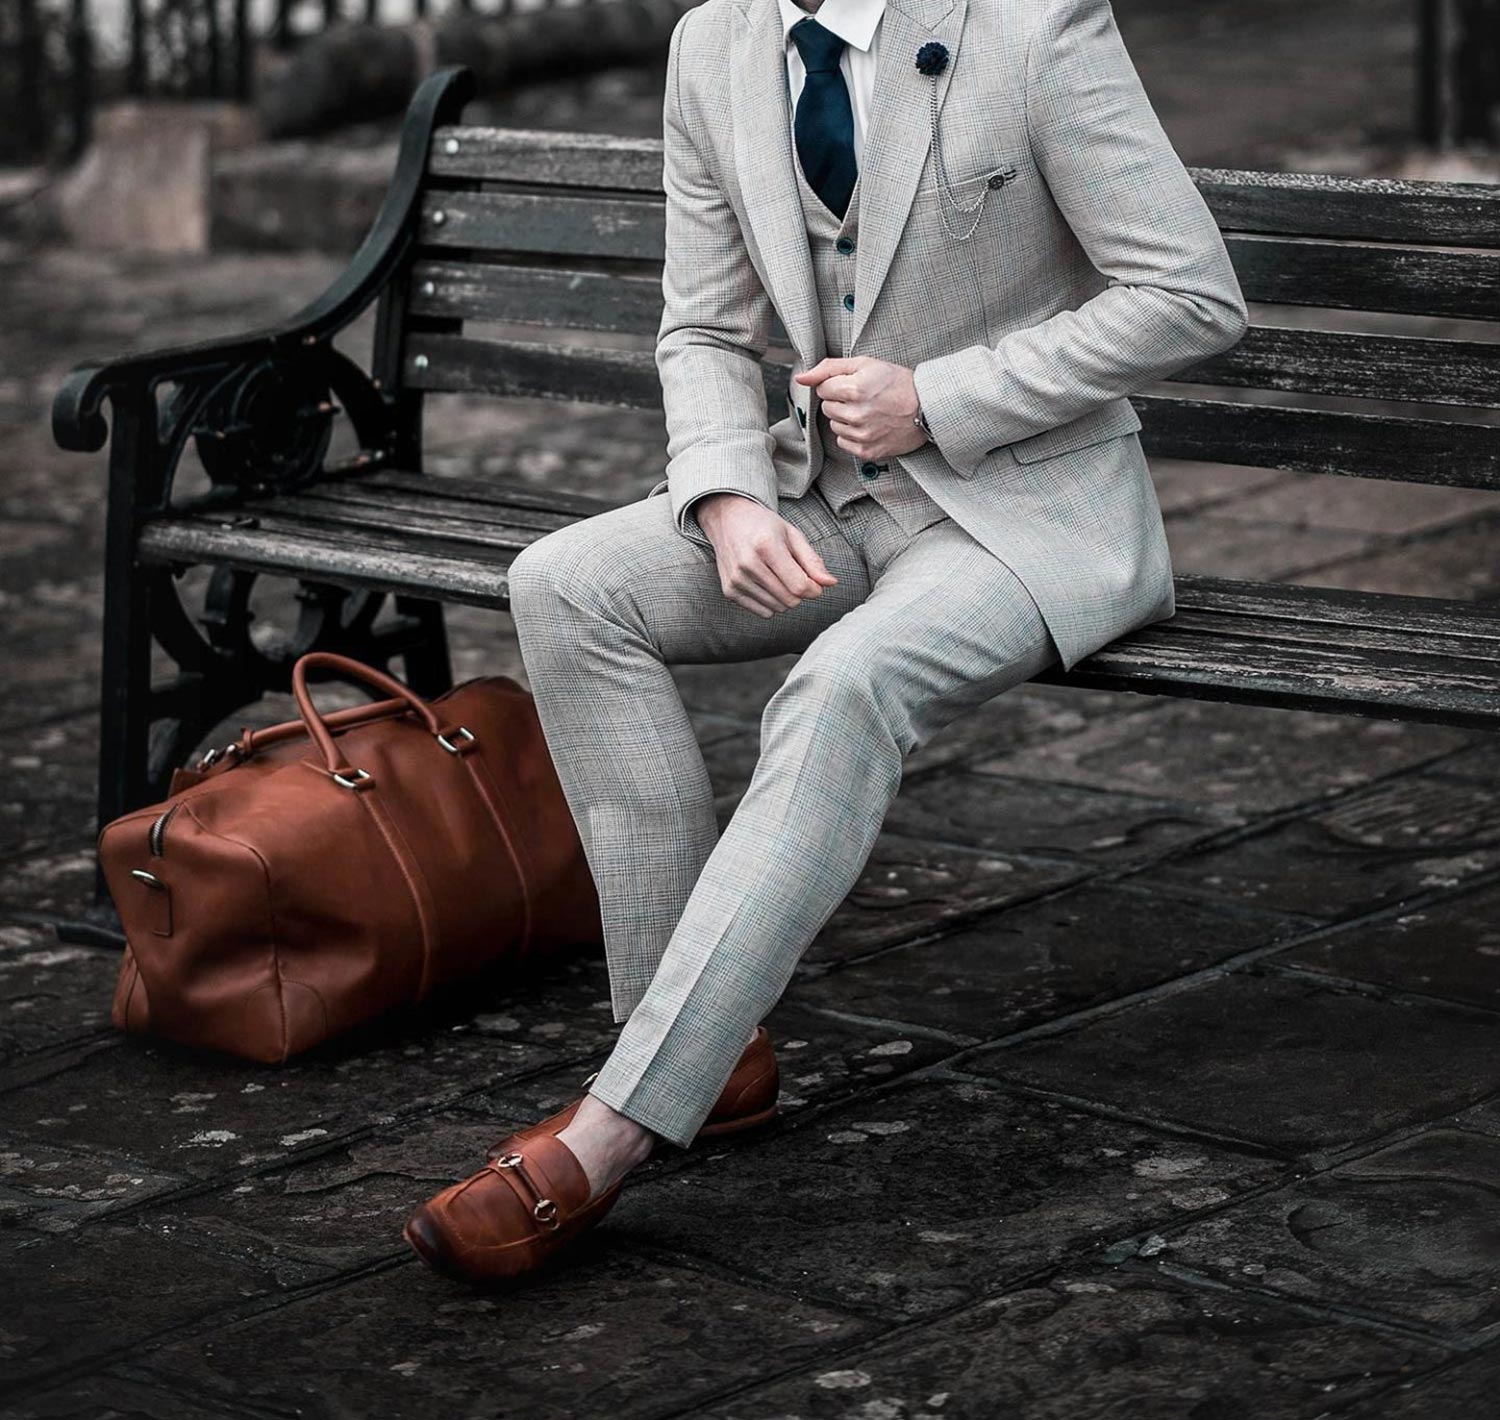 How To Wear Sneakers With A Suit (And Other Unique Shoe and Outfit Combos)  · Effortless Gent